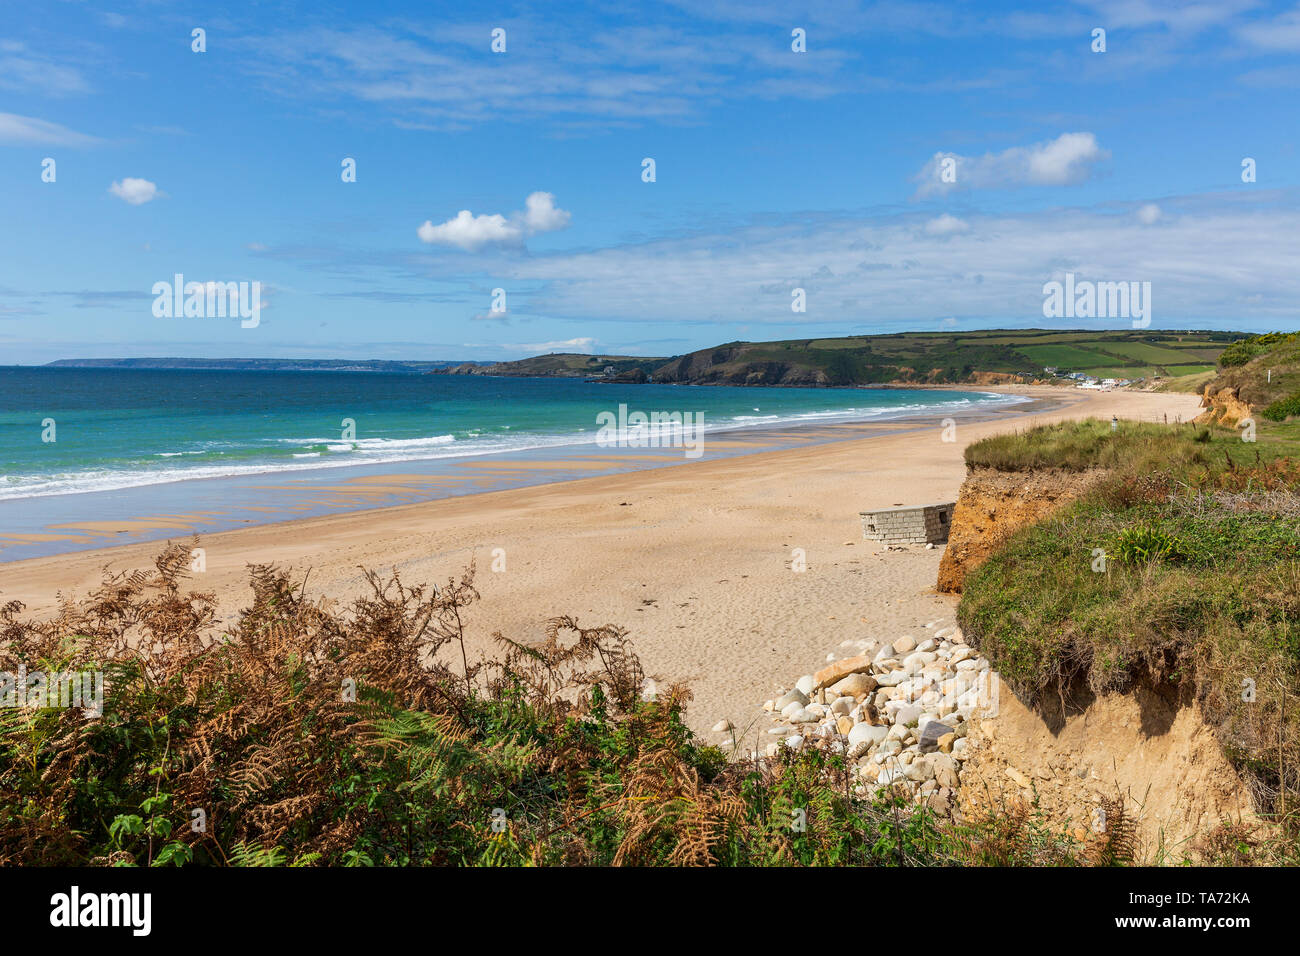 View of the sandy beach at Praa Sands in Cornwall, England, UK on a clear sunny day. Stock Photo